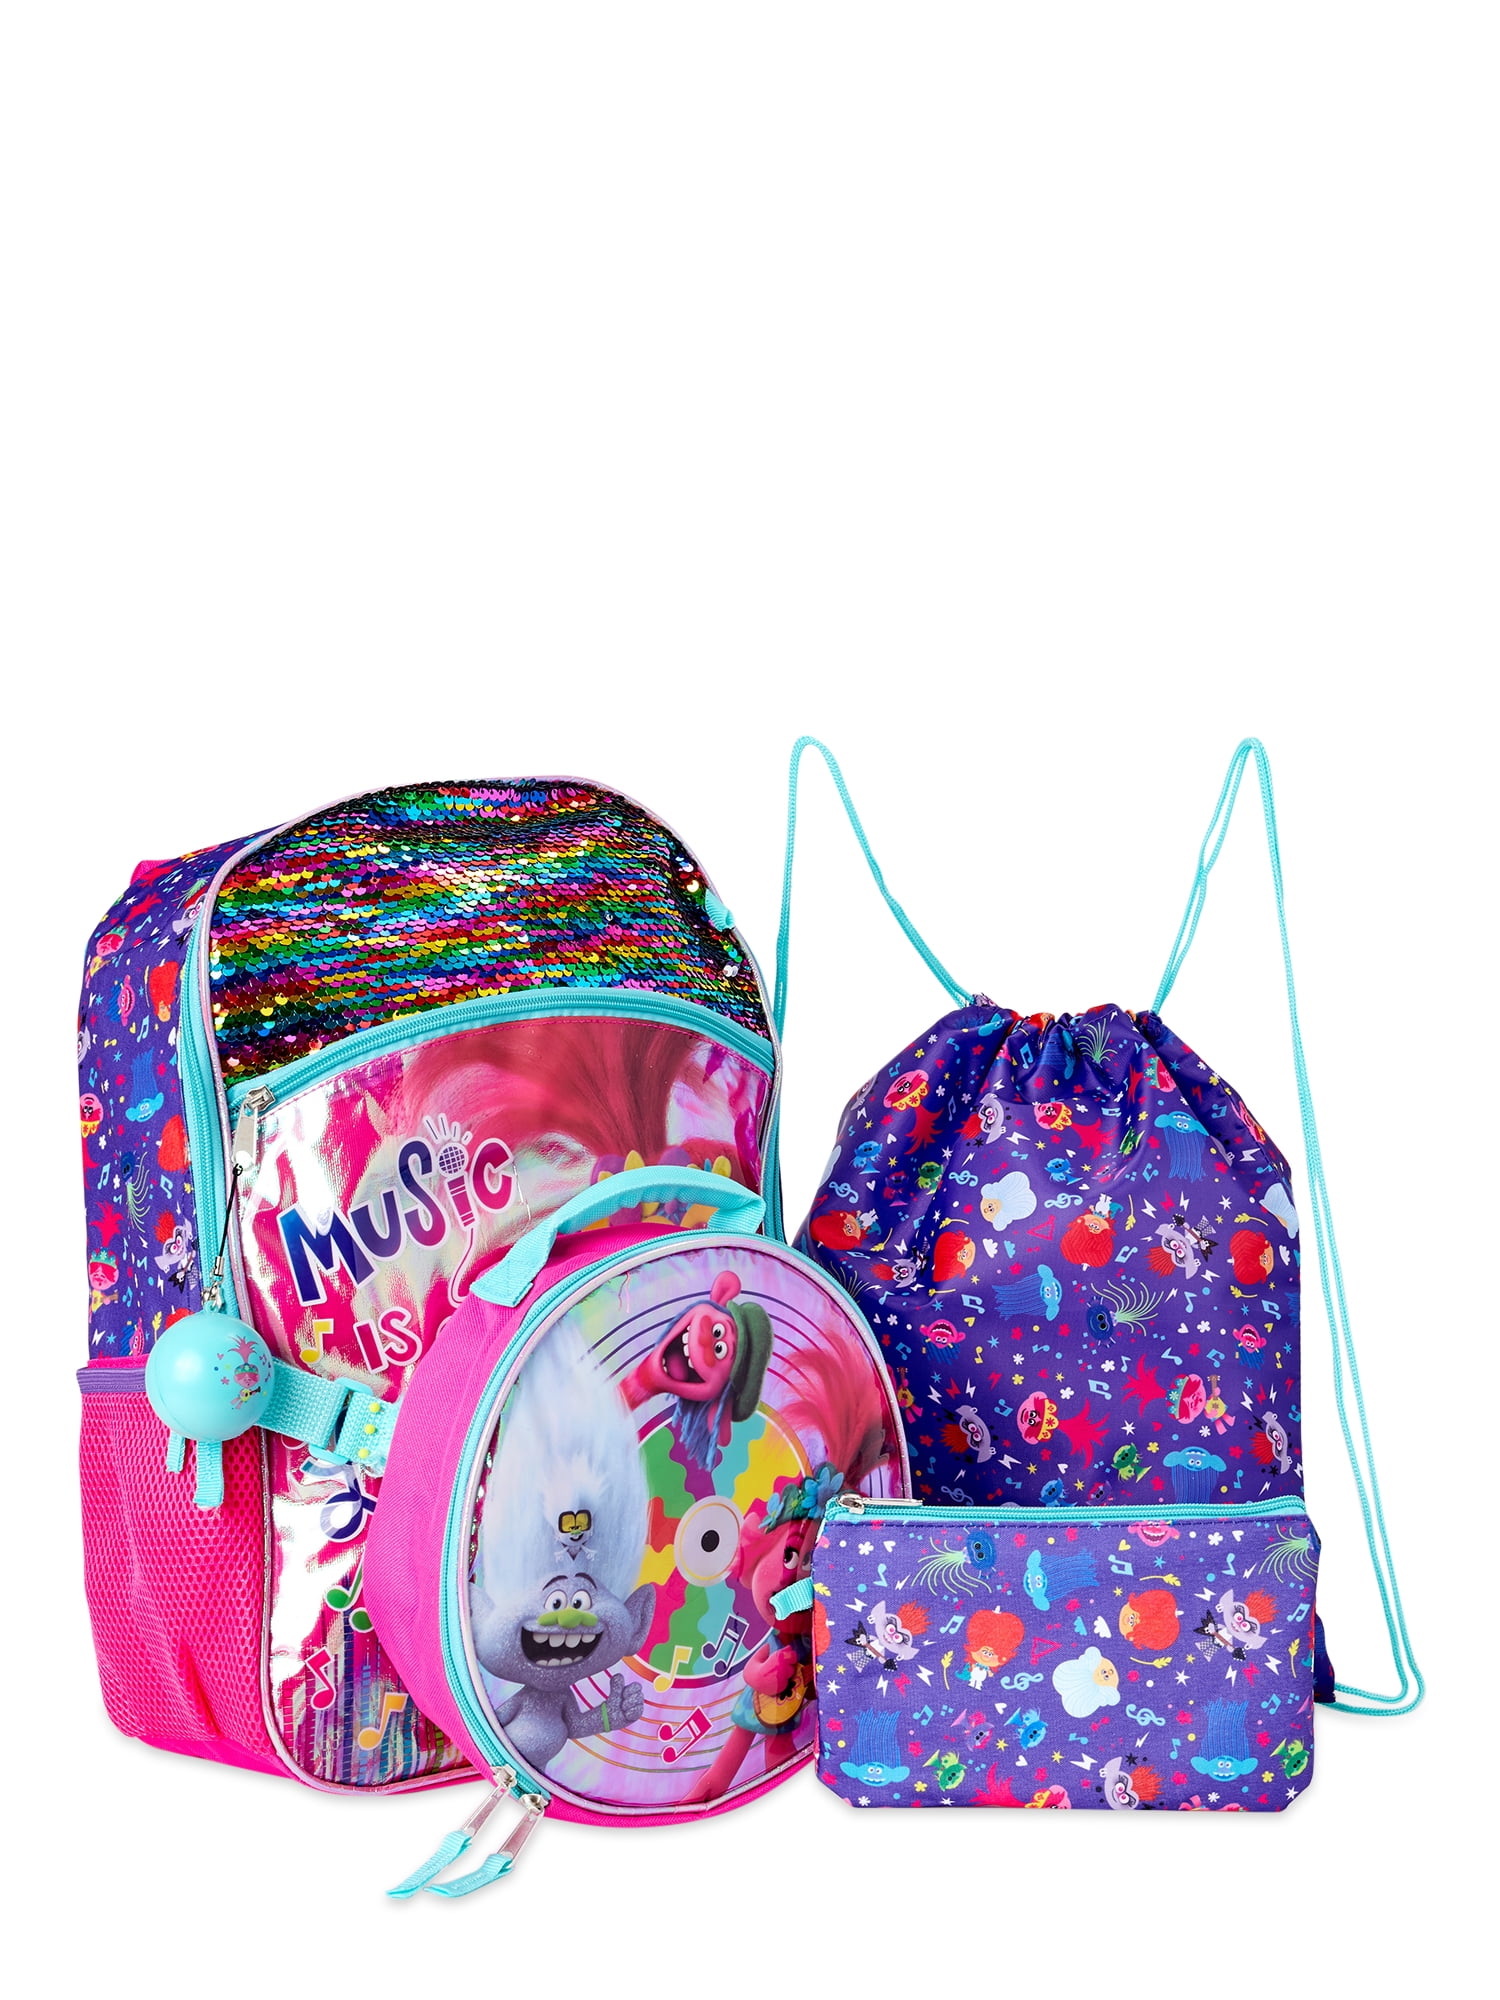 Dreamworks Trolls Music Is Life Girls' Backpack with Lunch Bag 5-Piece Set  